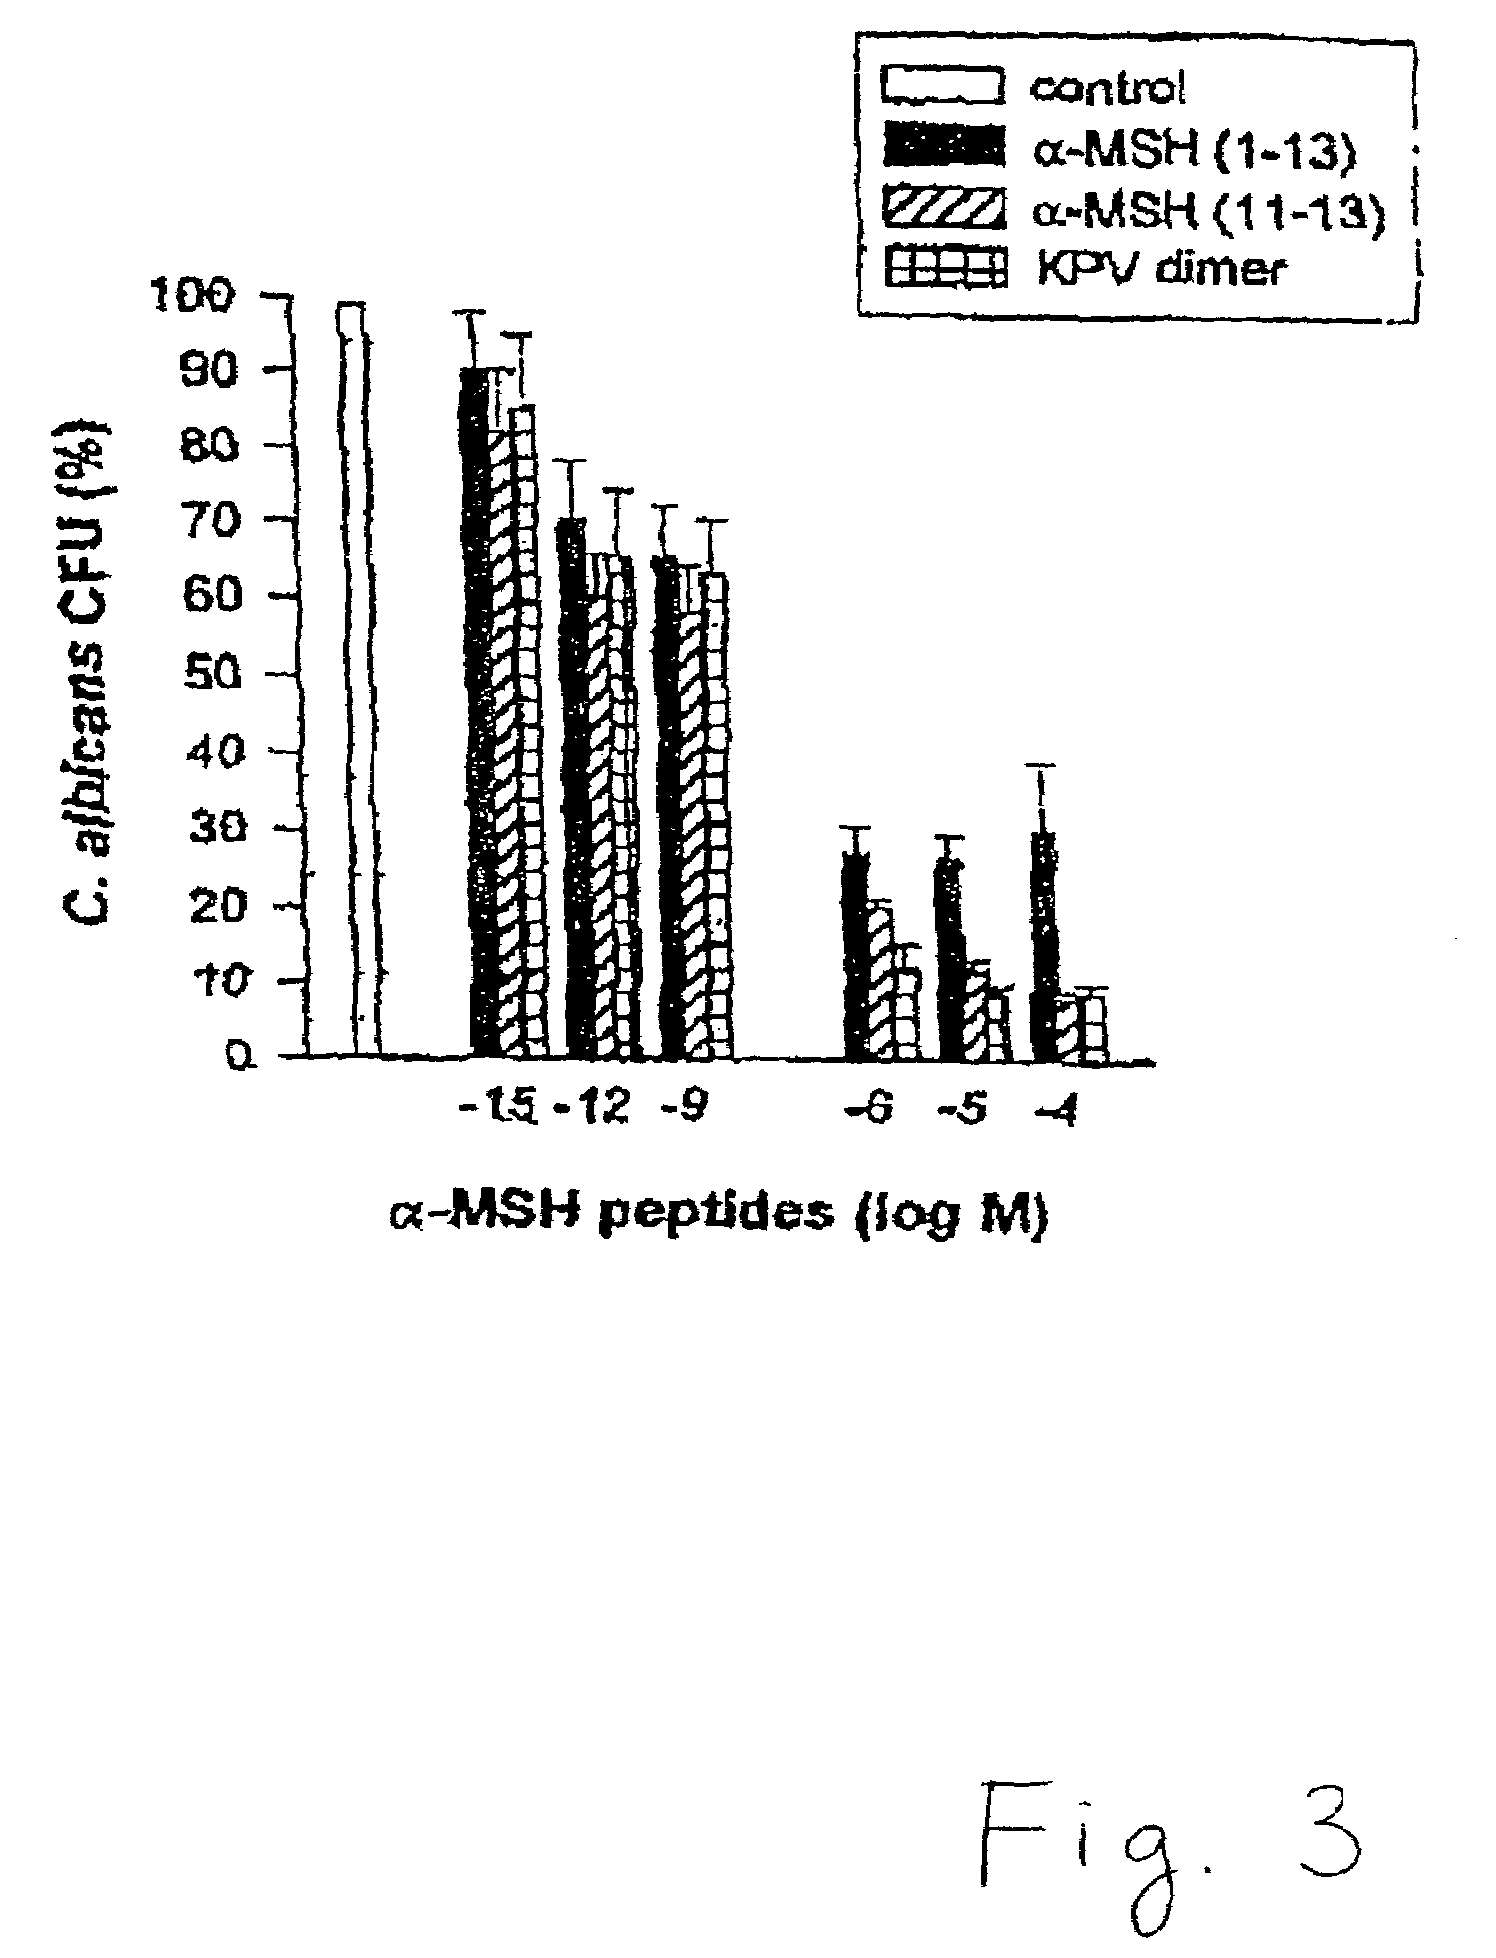 Composition and method of treatment for urogenital conditions